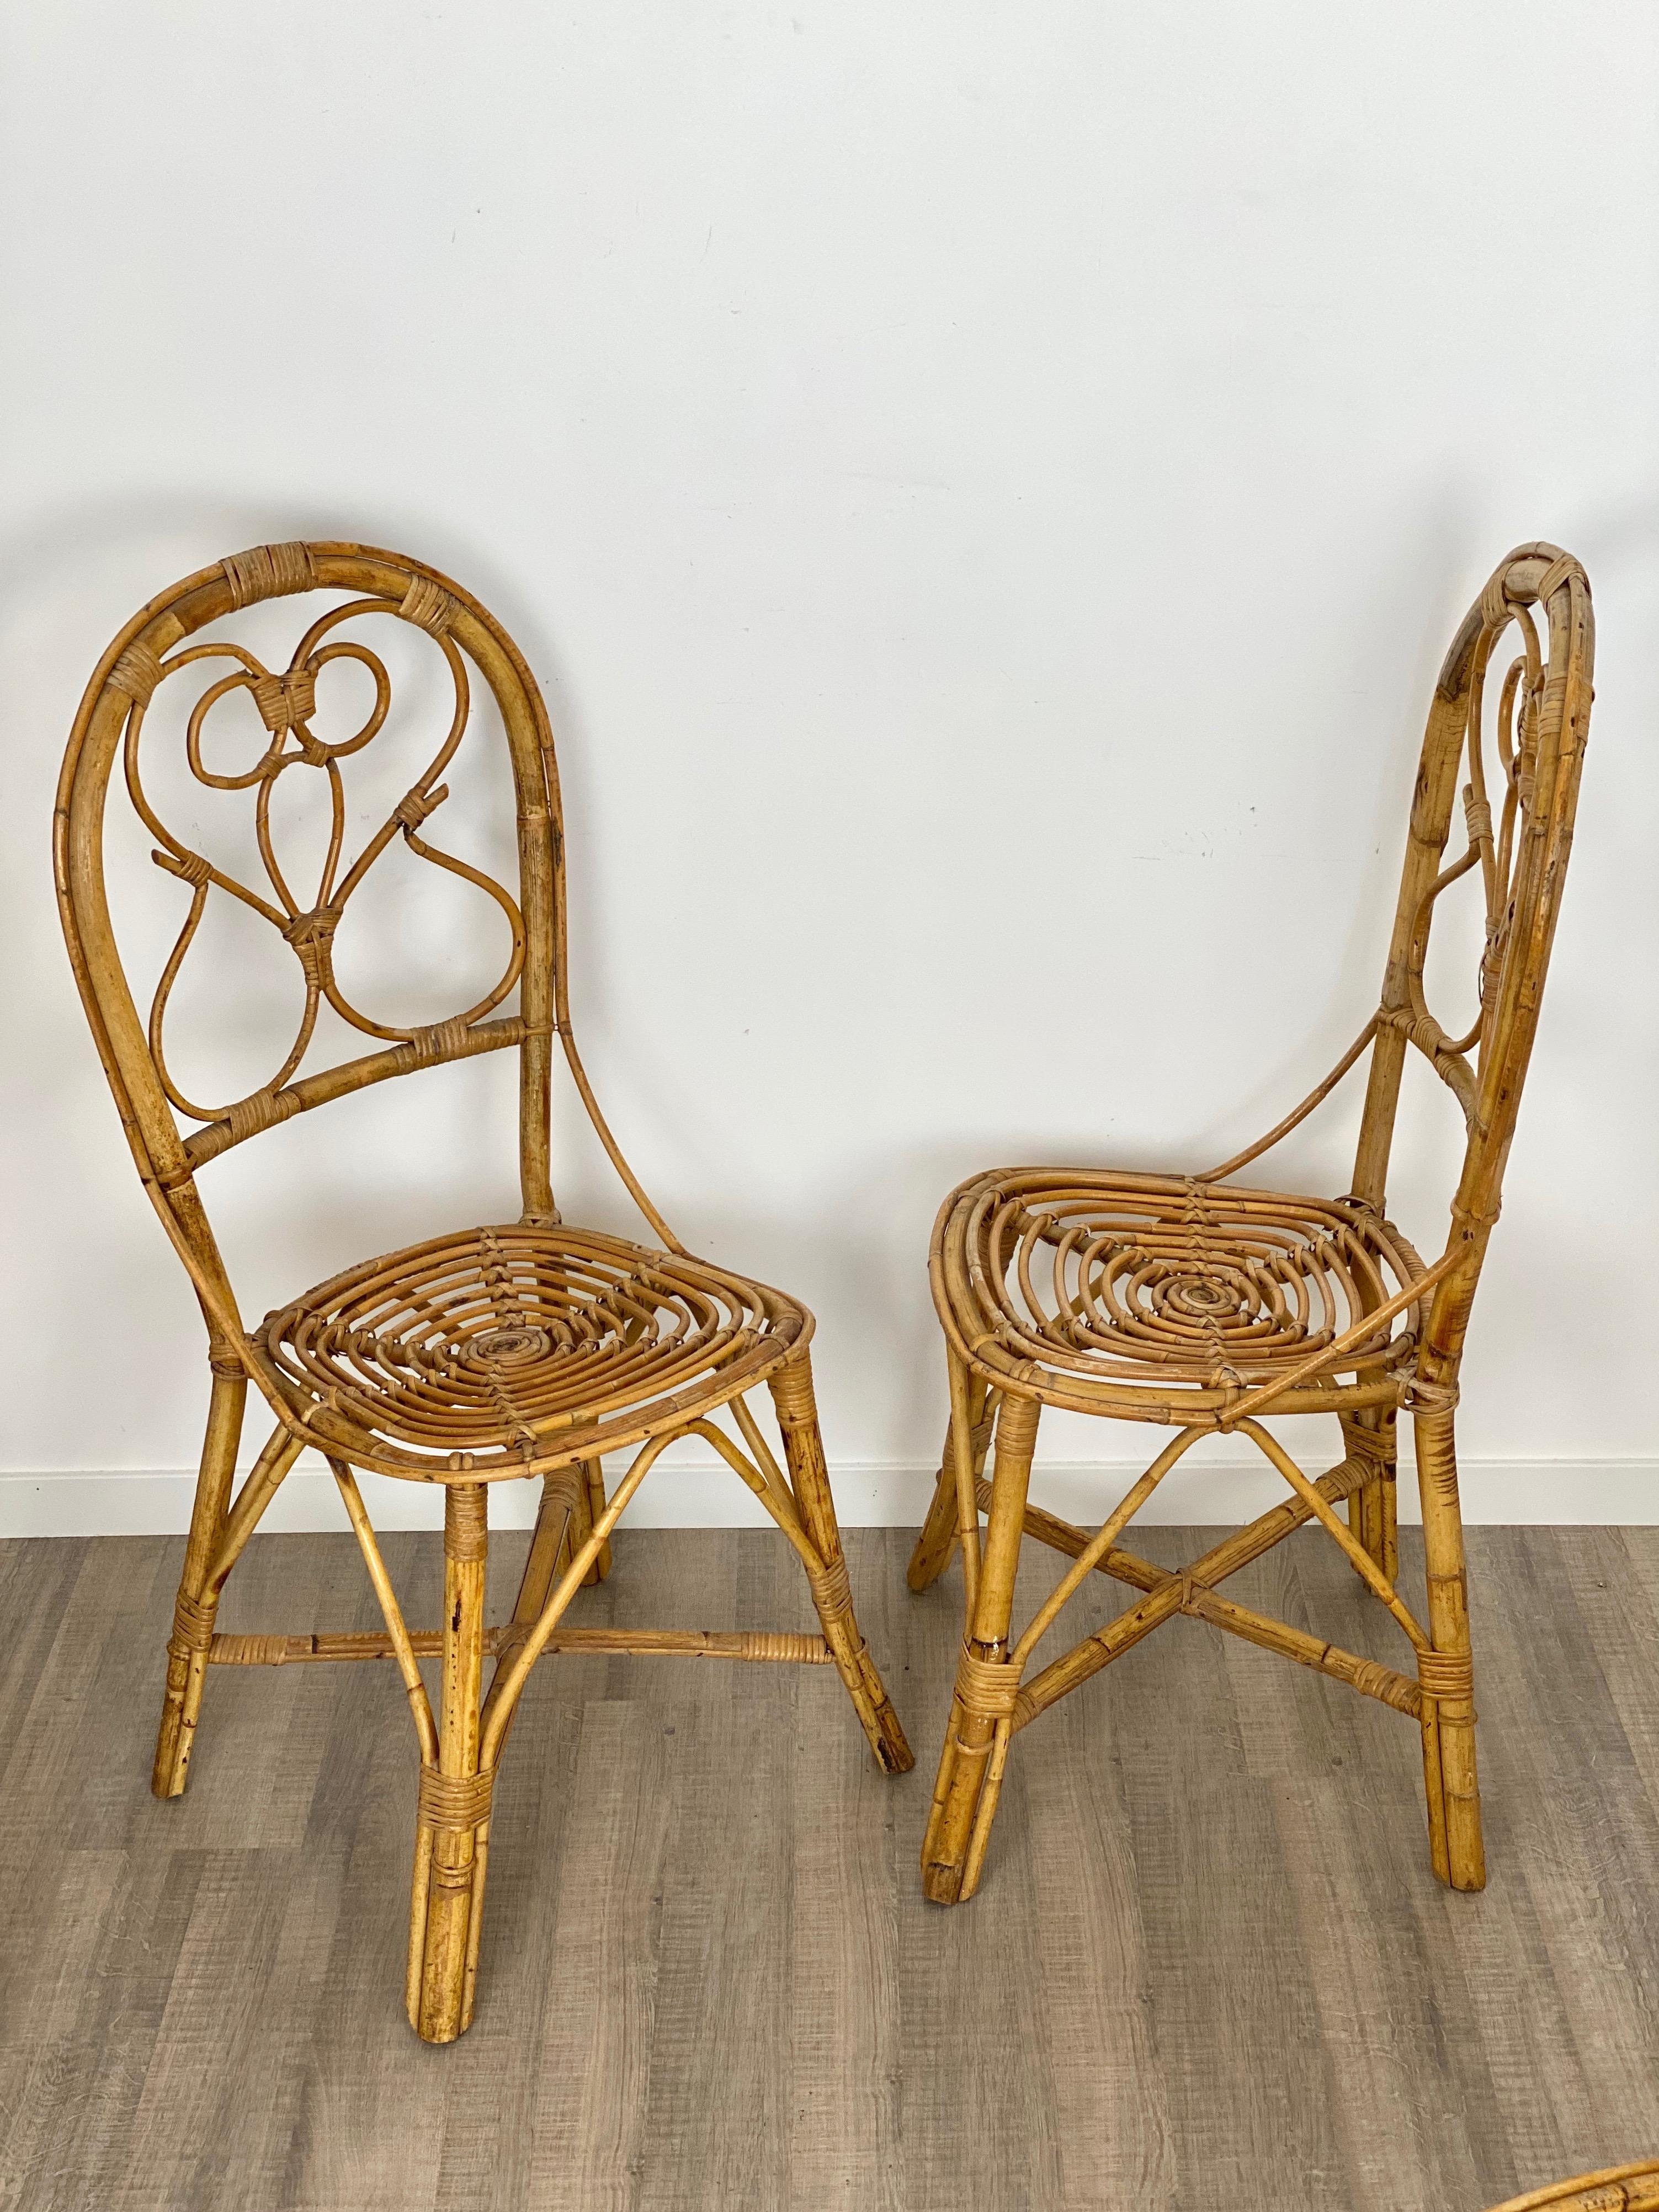 Six Chairs Rattan and Bamboo, Italy, 1960s For Sale 3